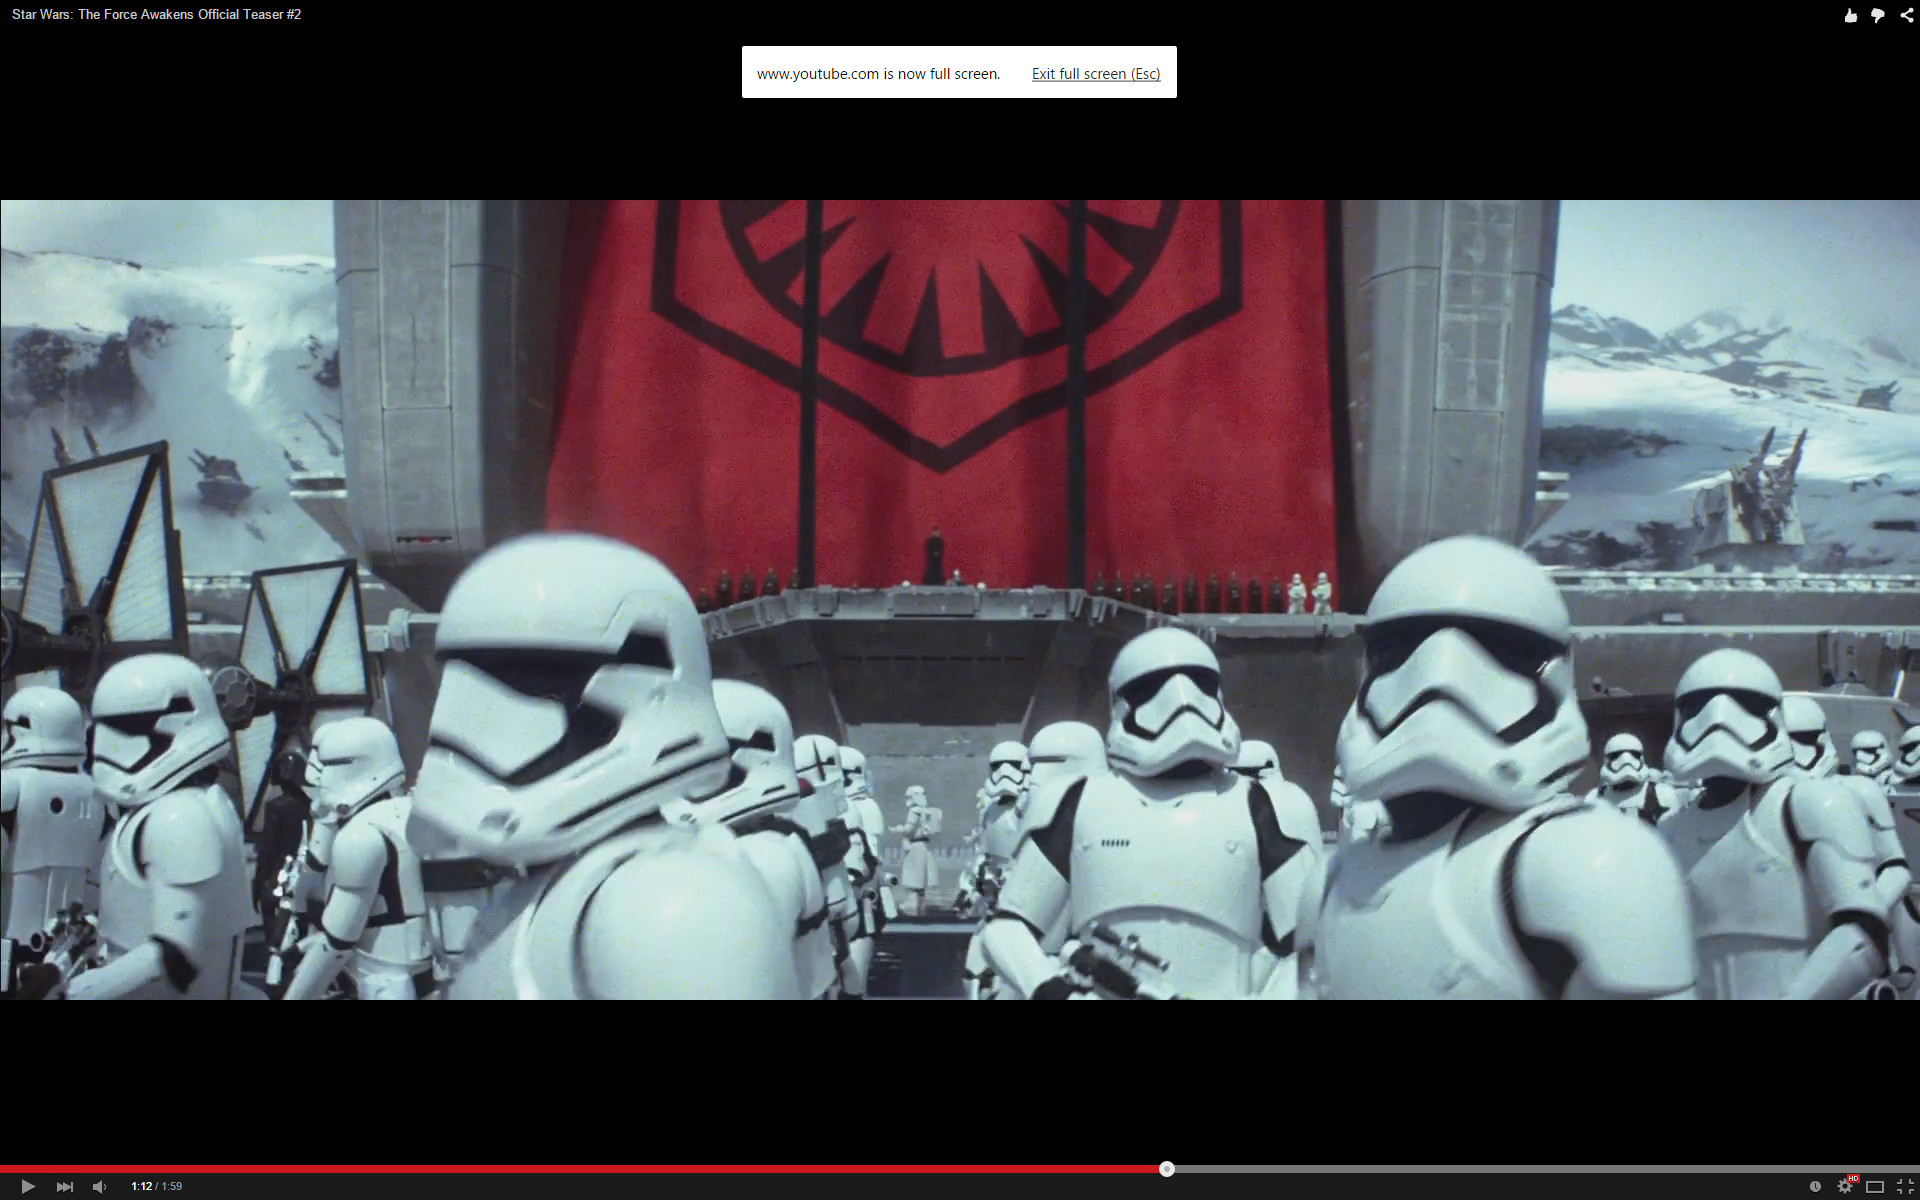 That emblem, those huge turrets in the background. Hell, those  stormtroopers look ready to tear shit up.